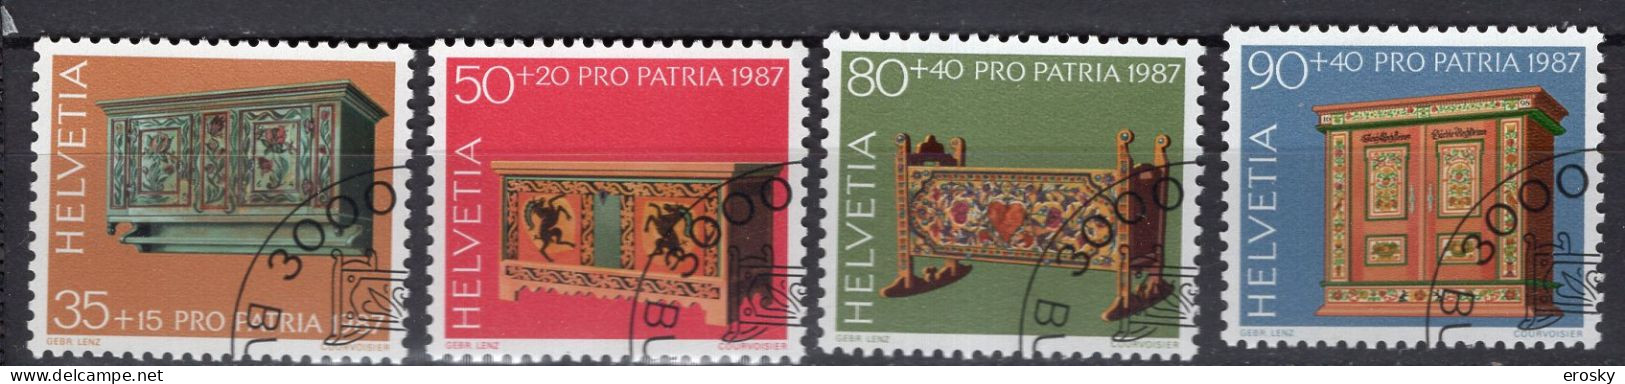 T3219 - SUISSE SWITZERLAND Yv N°1276/79 Pro Patria Fete Nationale - Used Stamps